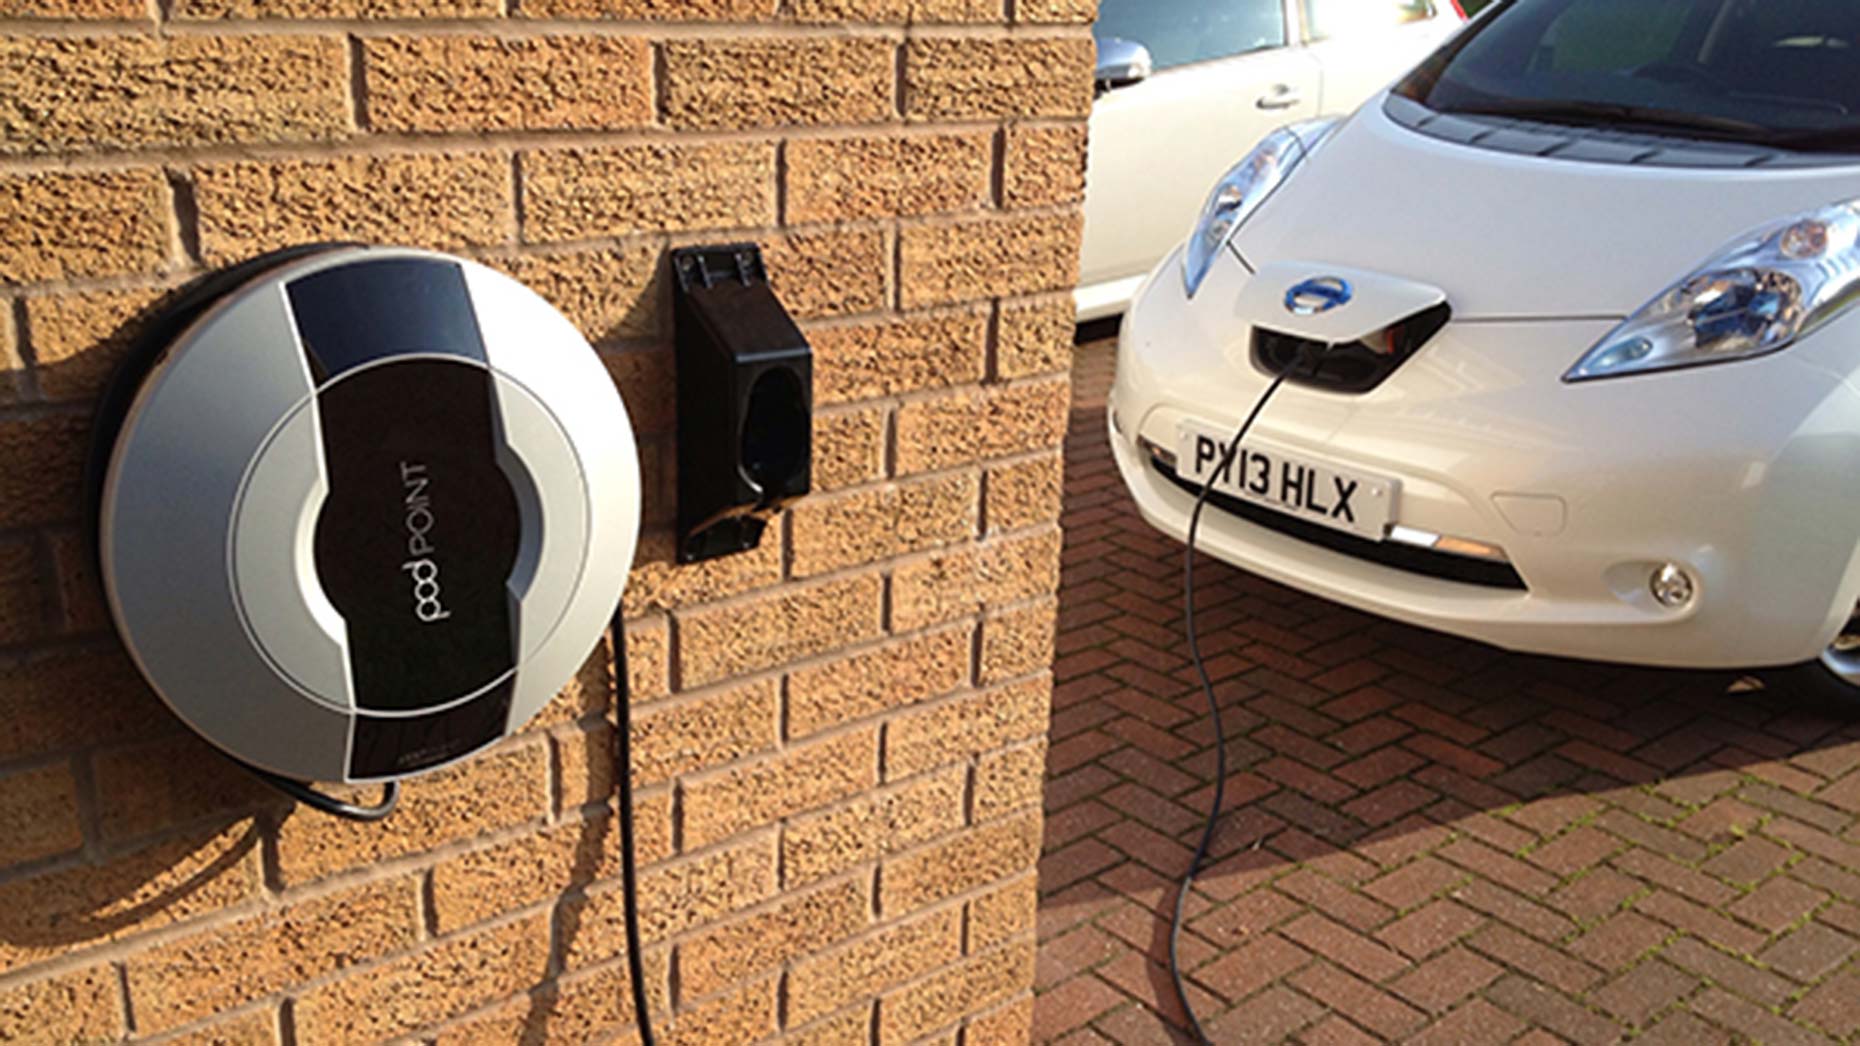 lincolnshire-firm-installs-electric-car-charging-points-for-1p